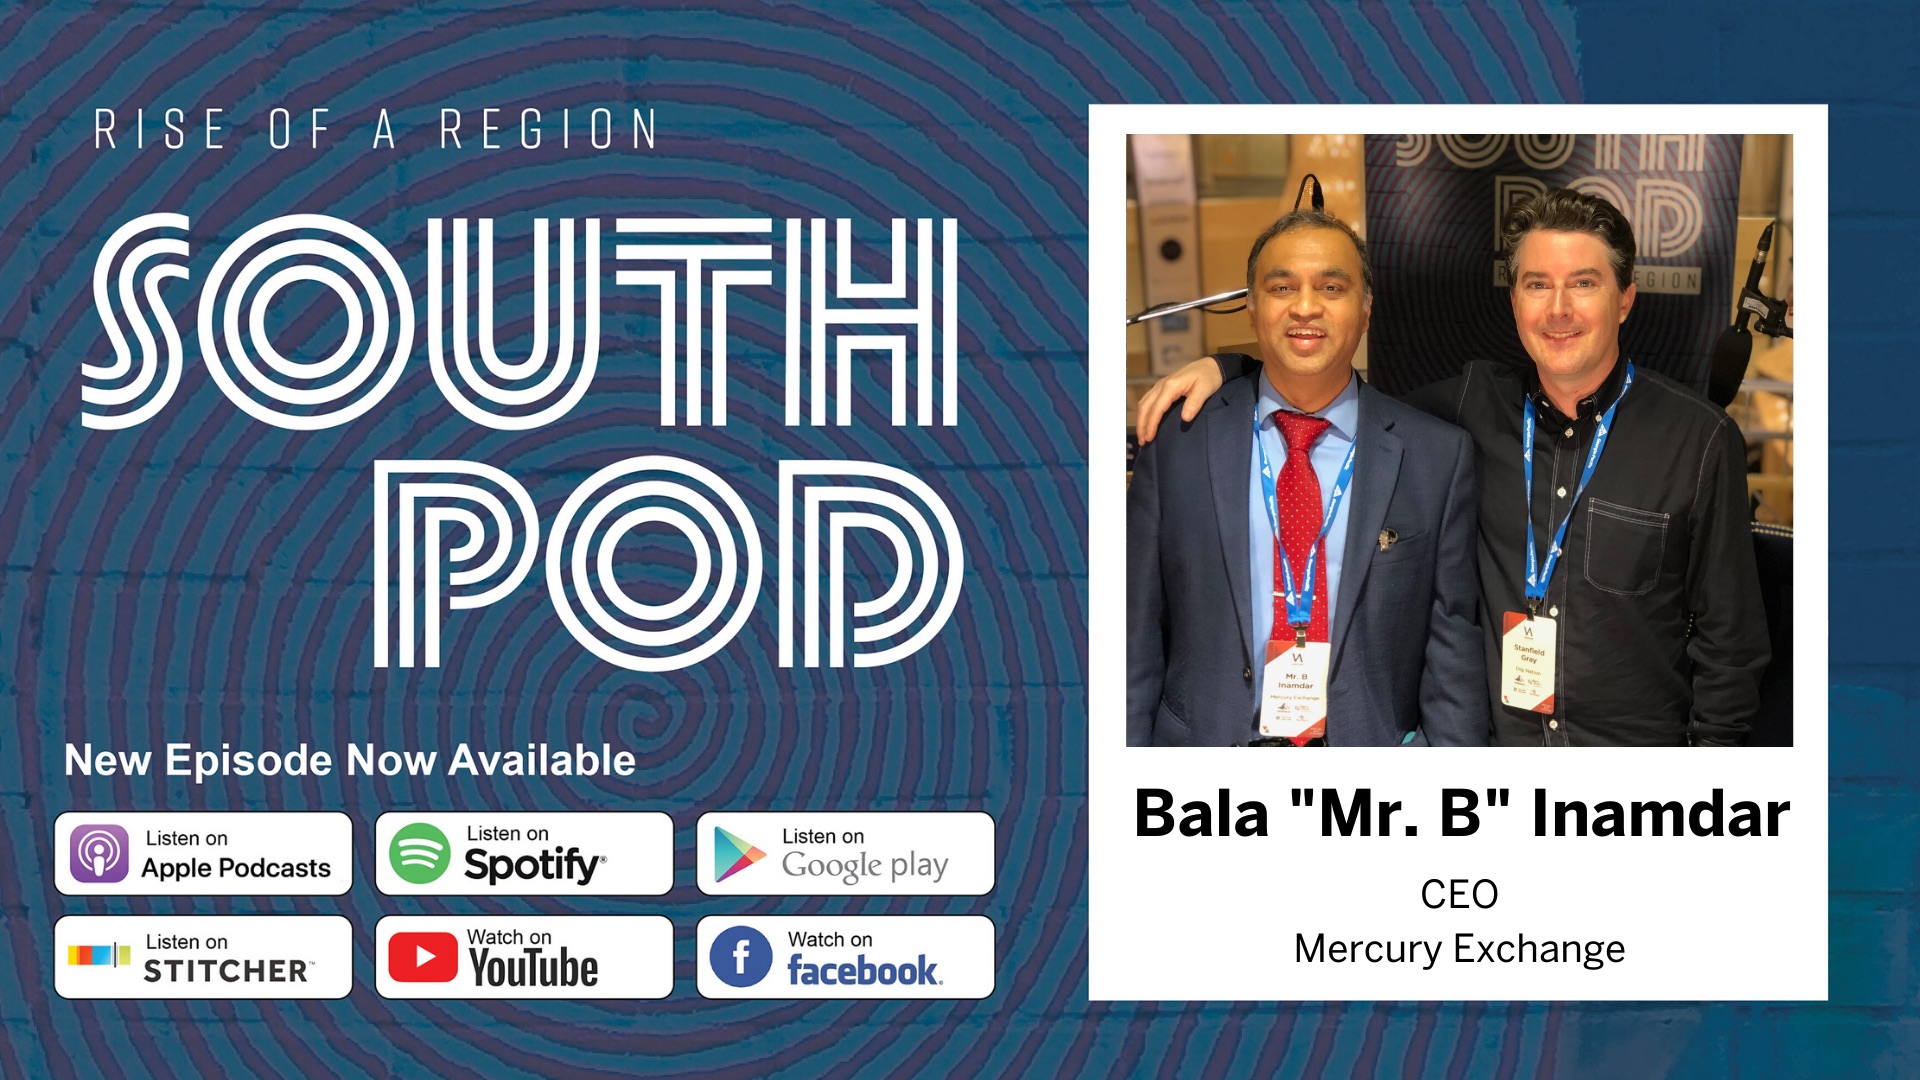 Bala “Mr. B” Inamdar, CEO, Mercury Exchange on South Pod (Recorded at Venture135 in Charlotte)